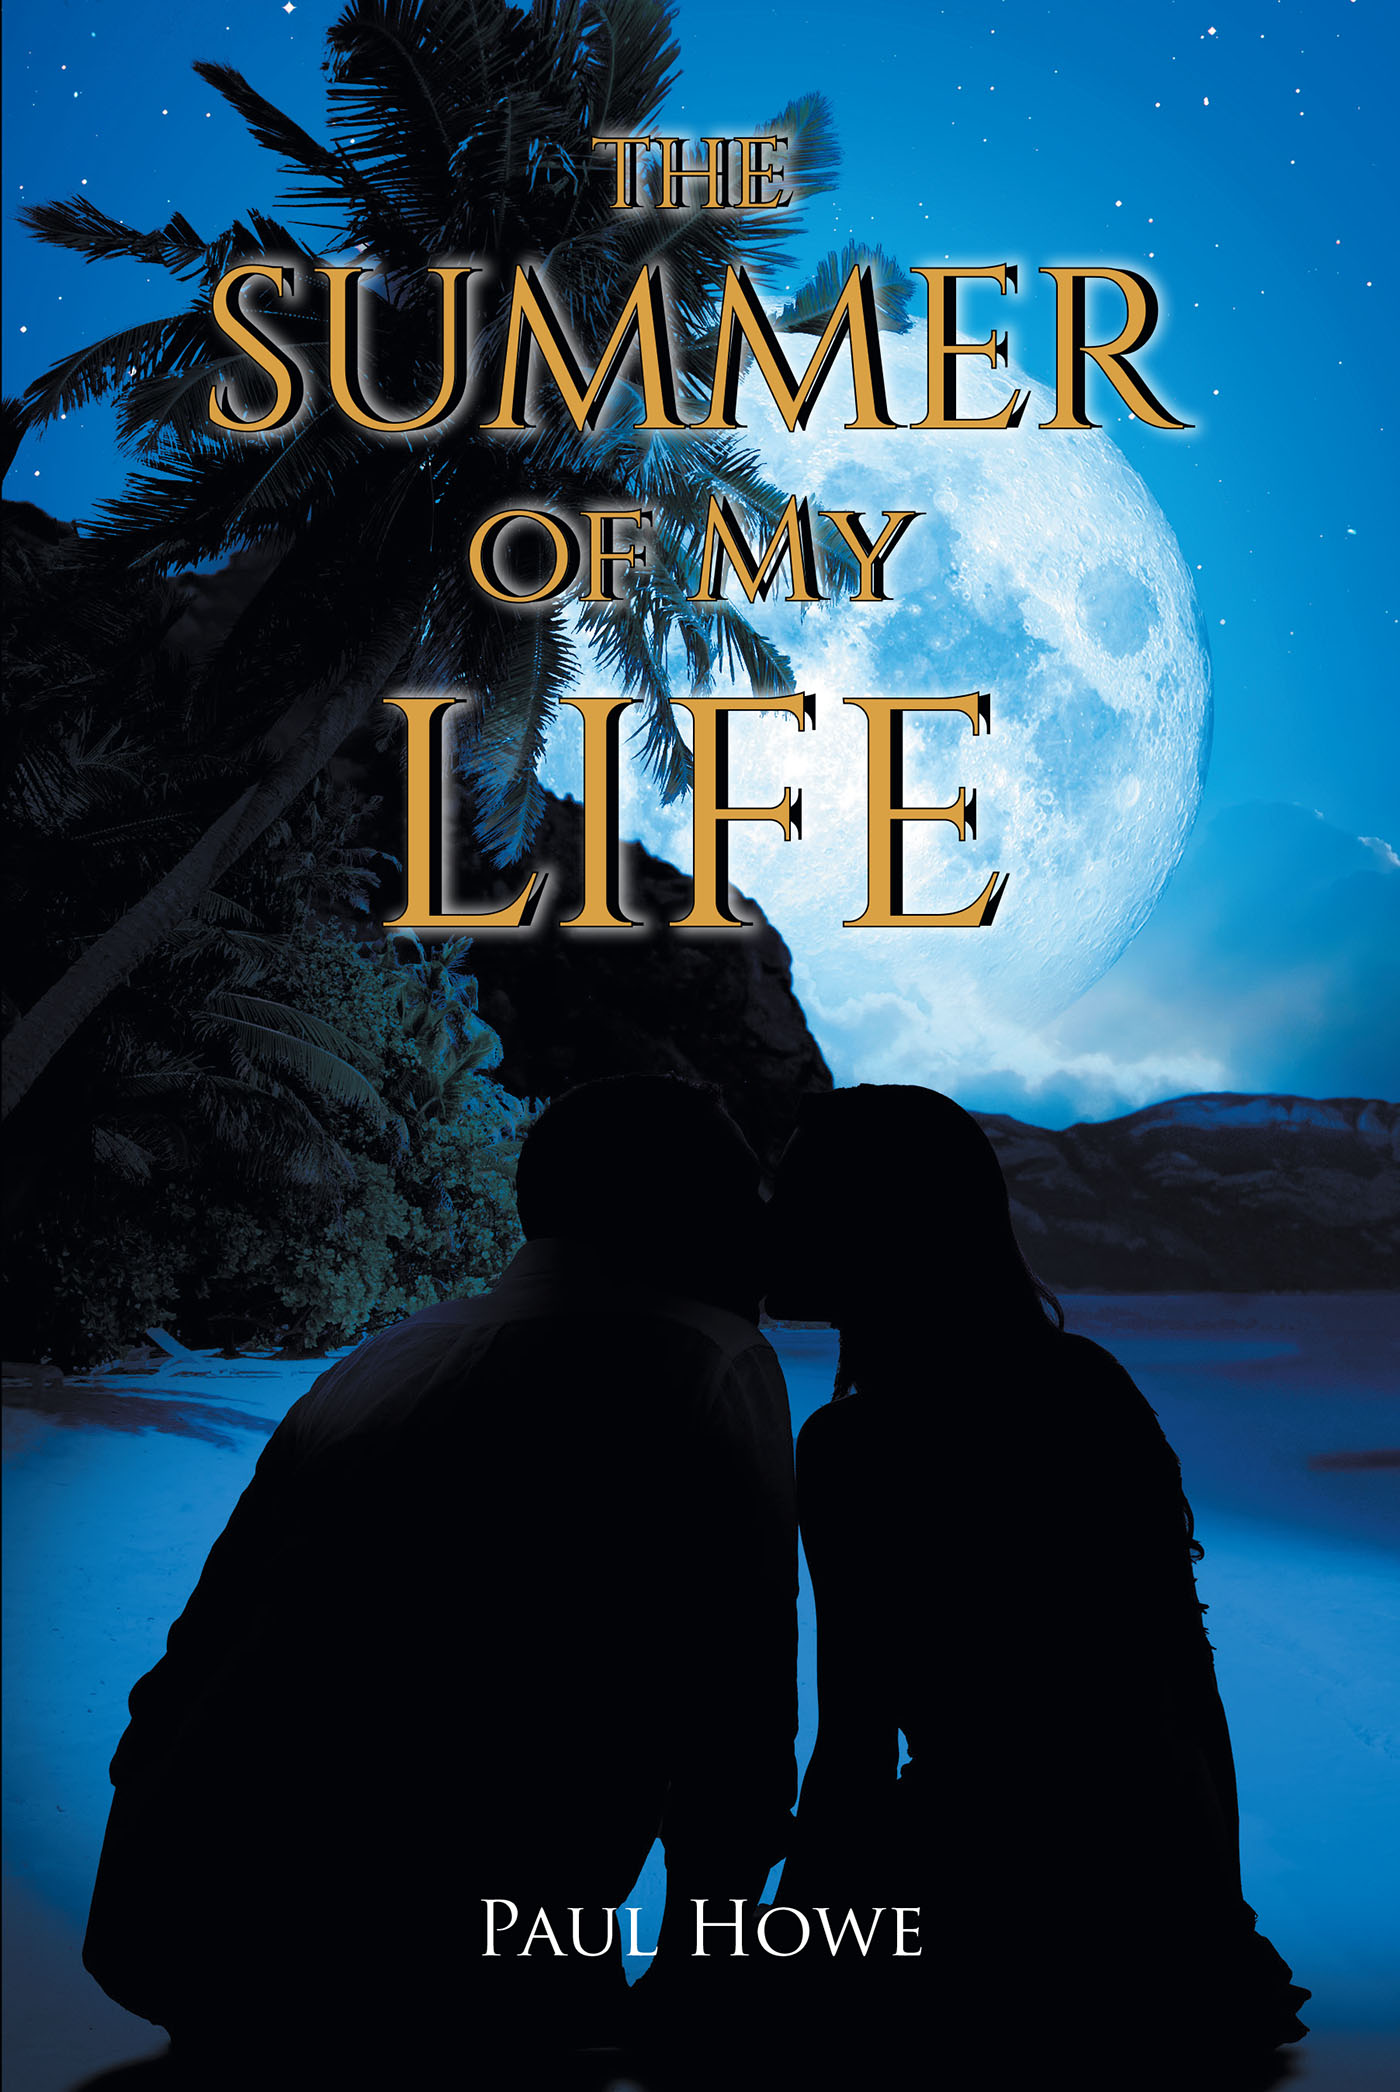 Paul Howe’s Newly Released "The Summer of My Life" is a Touching Celebration of an Unexpected and Lasting Love